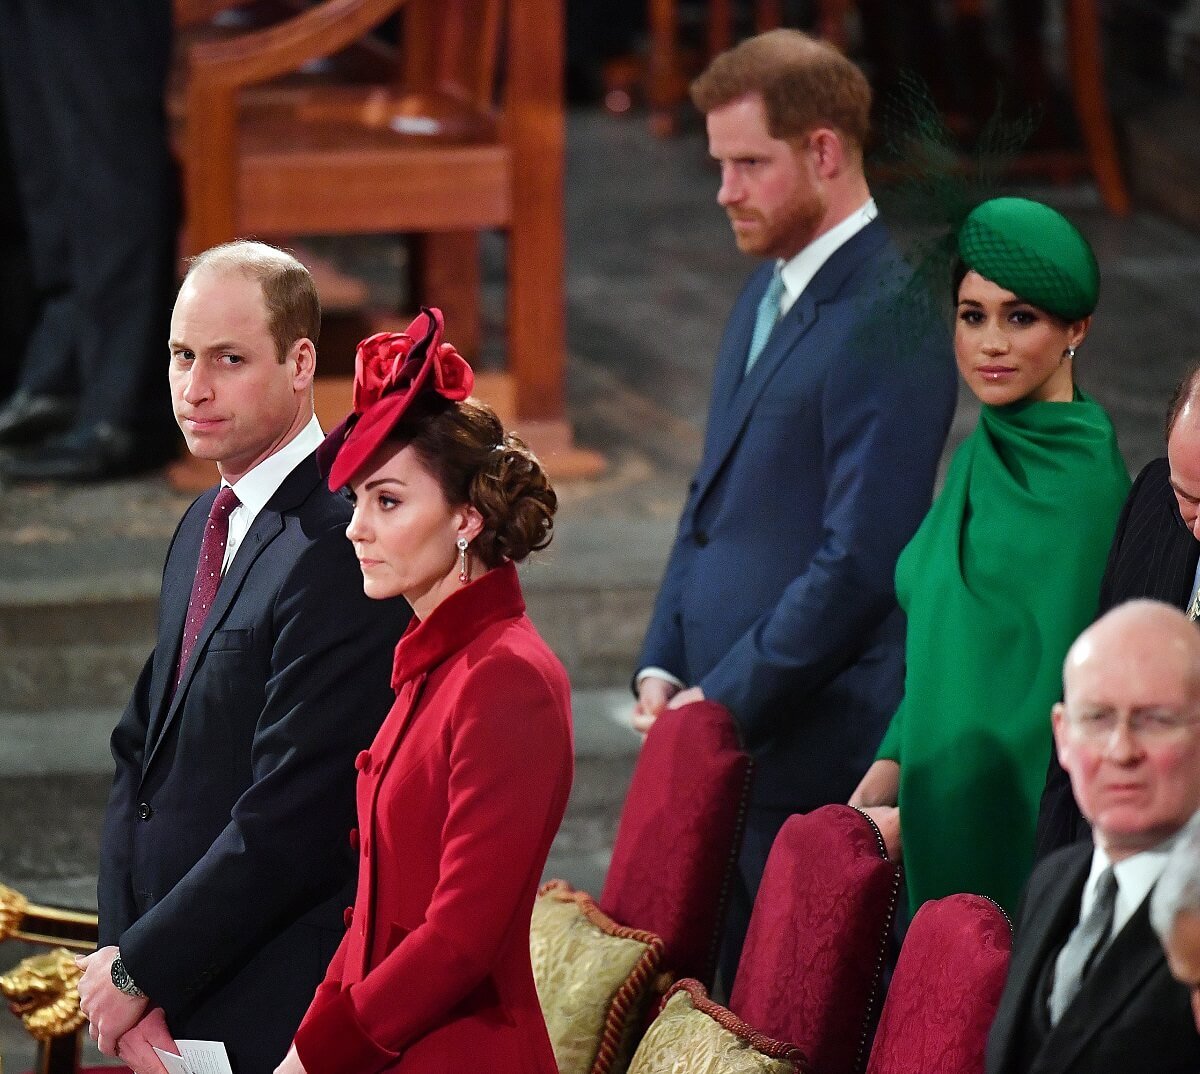 Prince William, Kate Middleton, Prince Harry, and Meghan Markle attend the Commonwealth Day Service 2020 